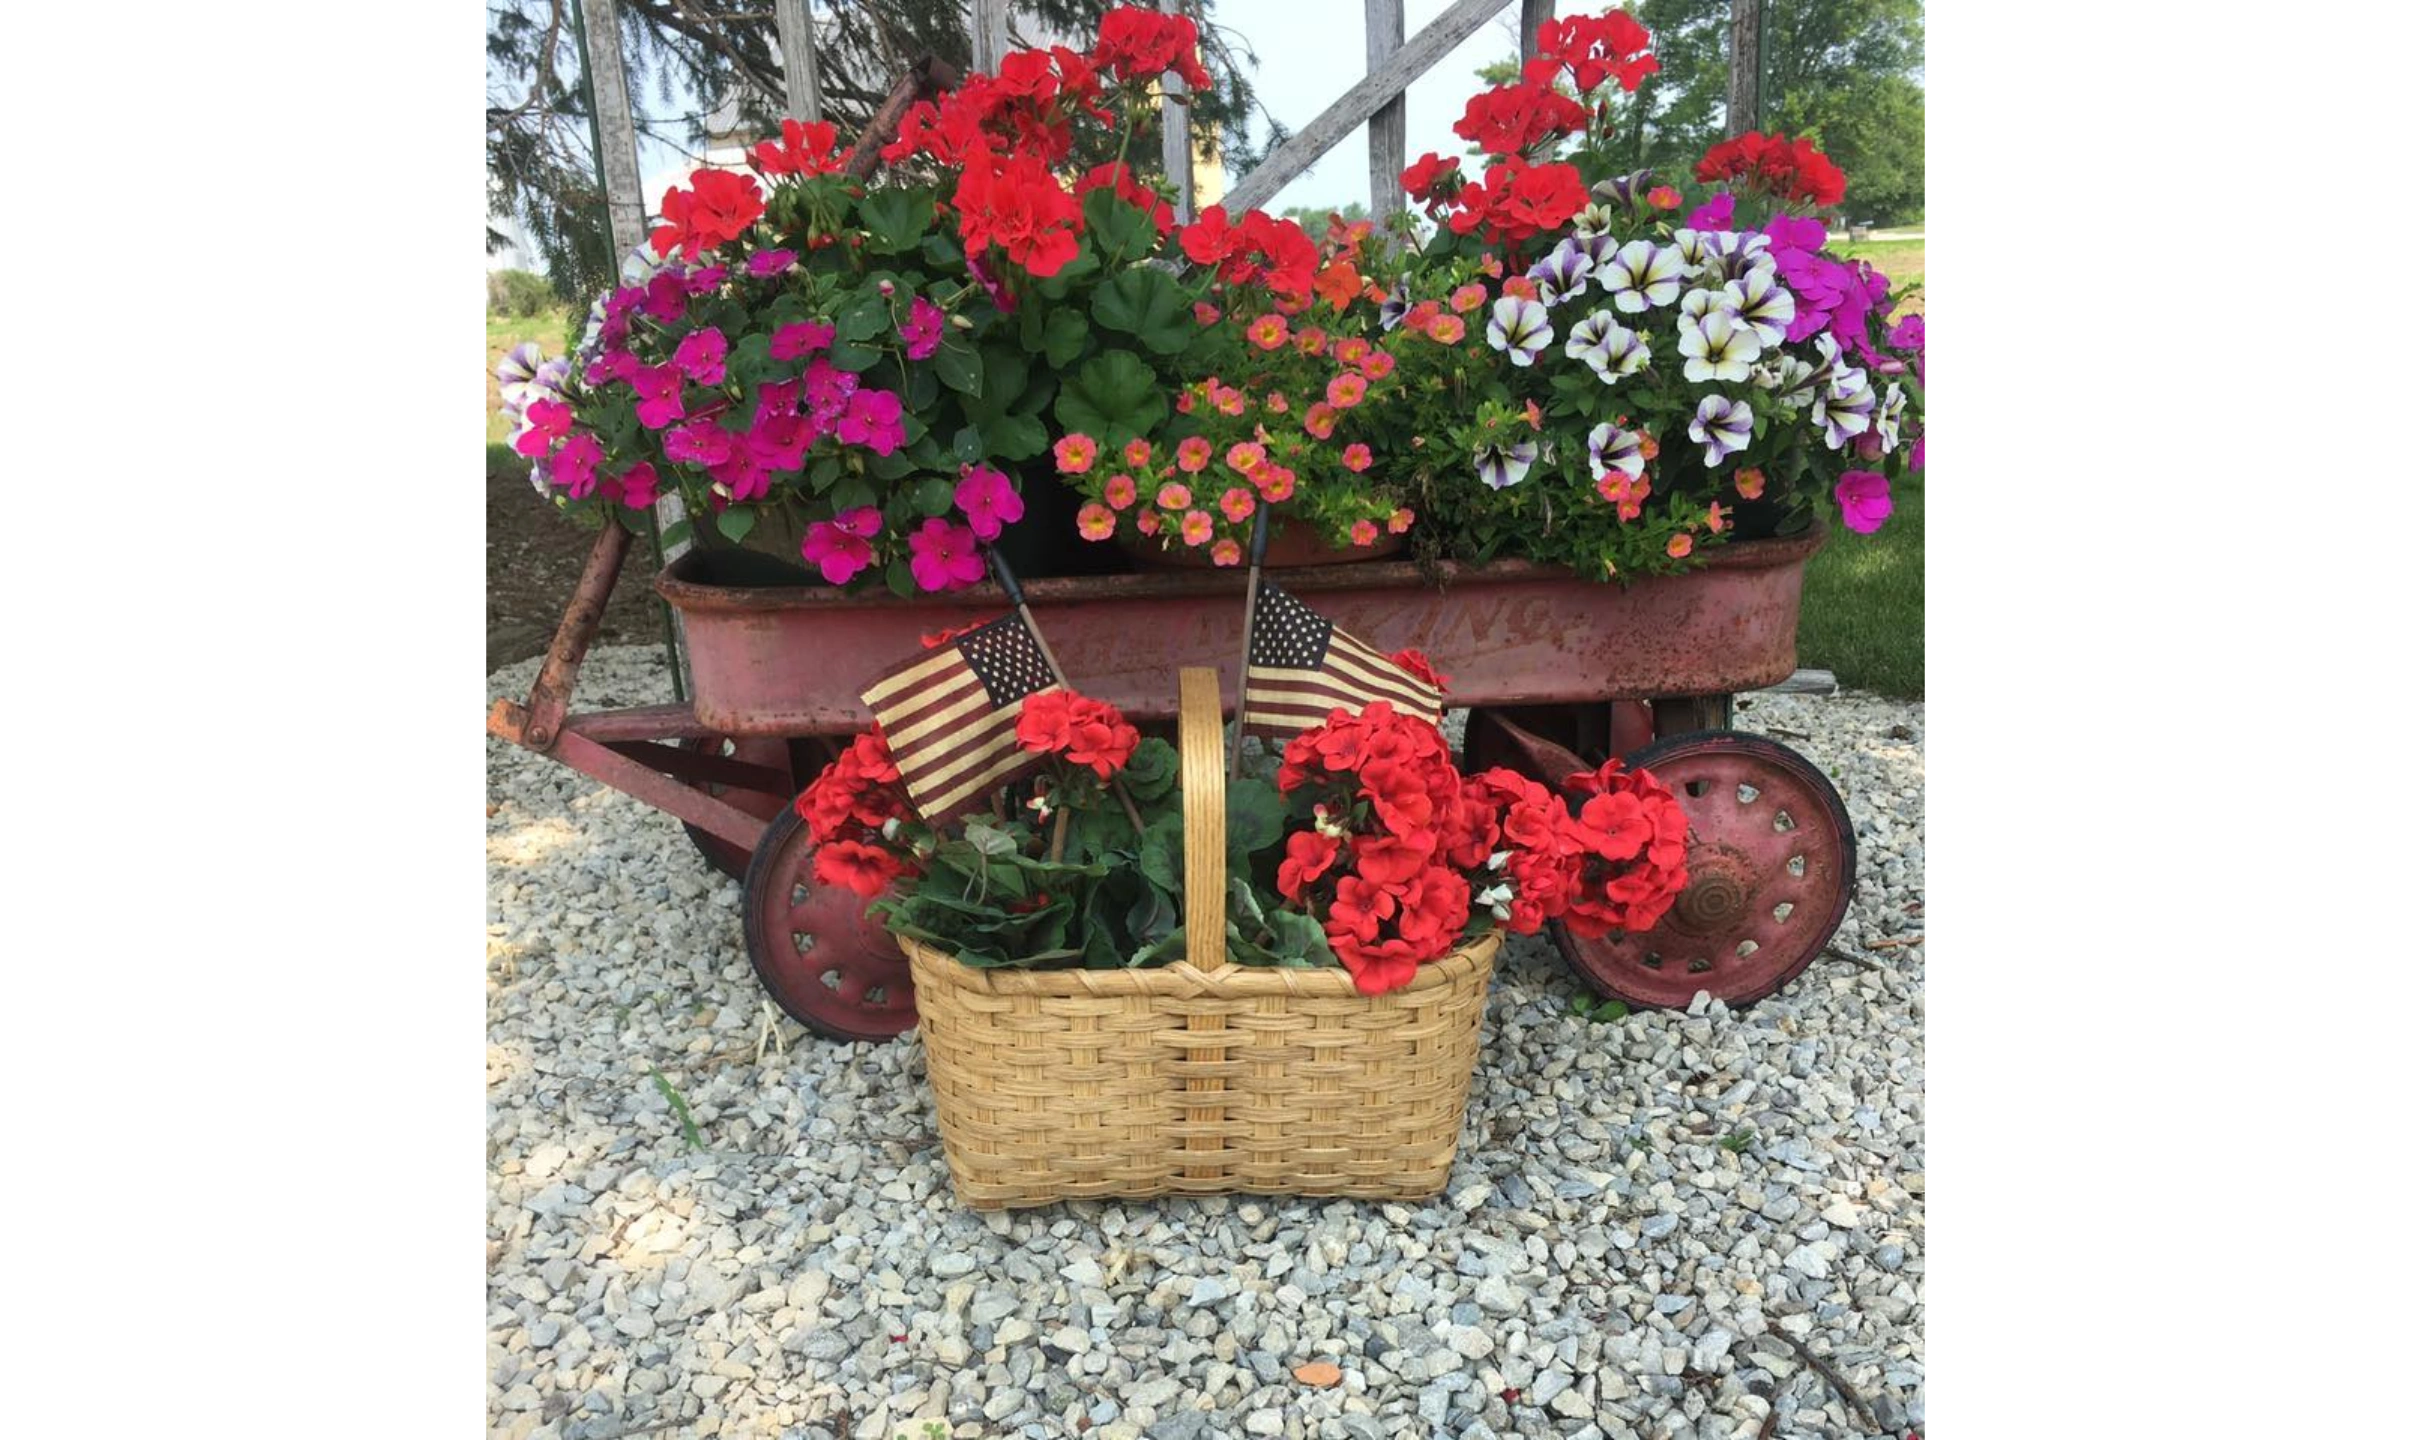 Wagon with flowers and basket with flowers and American Flags.